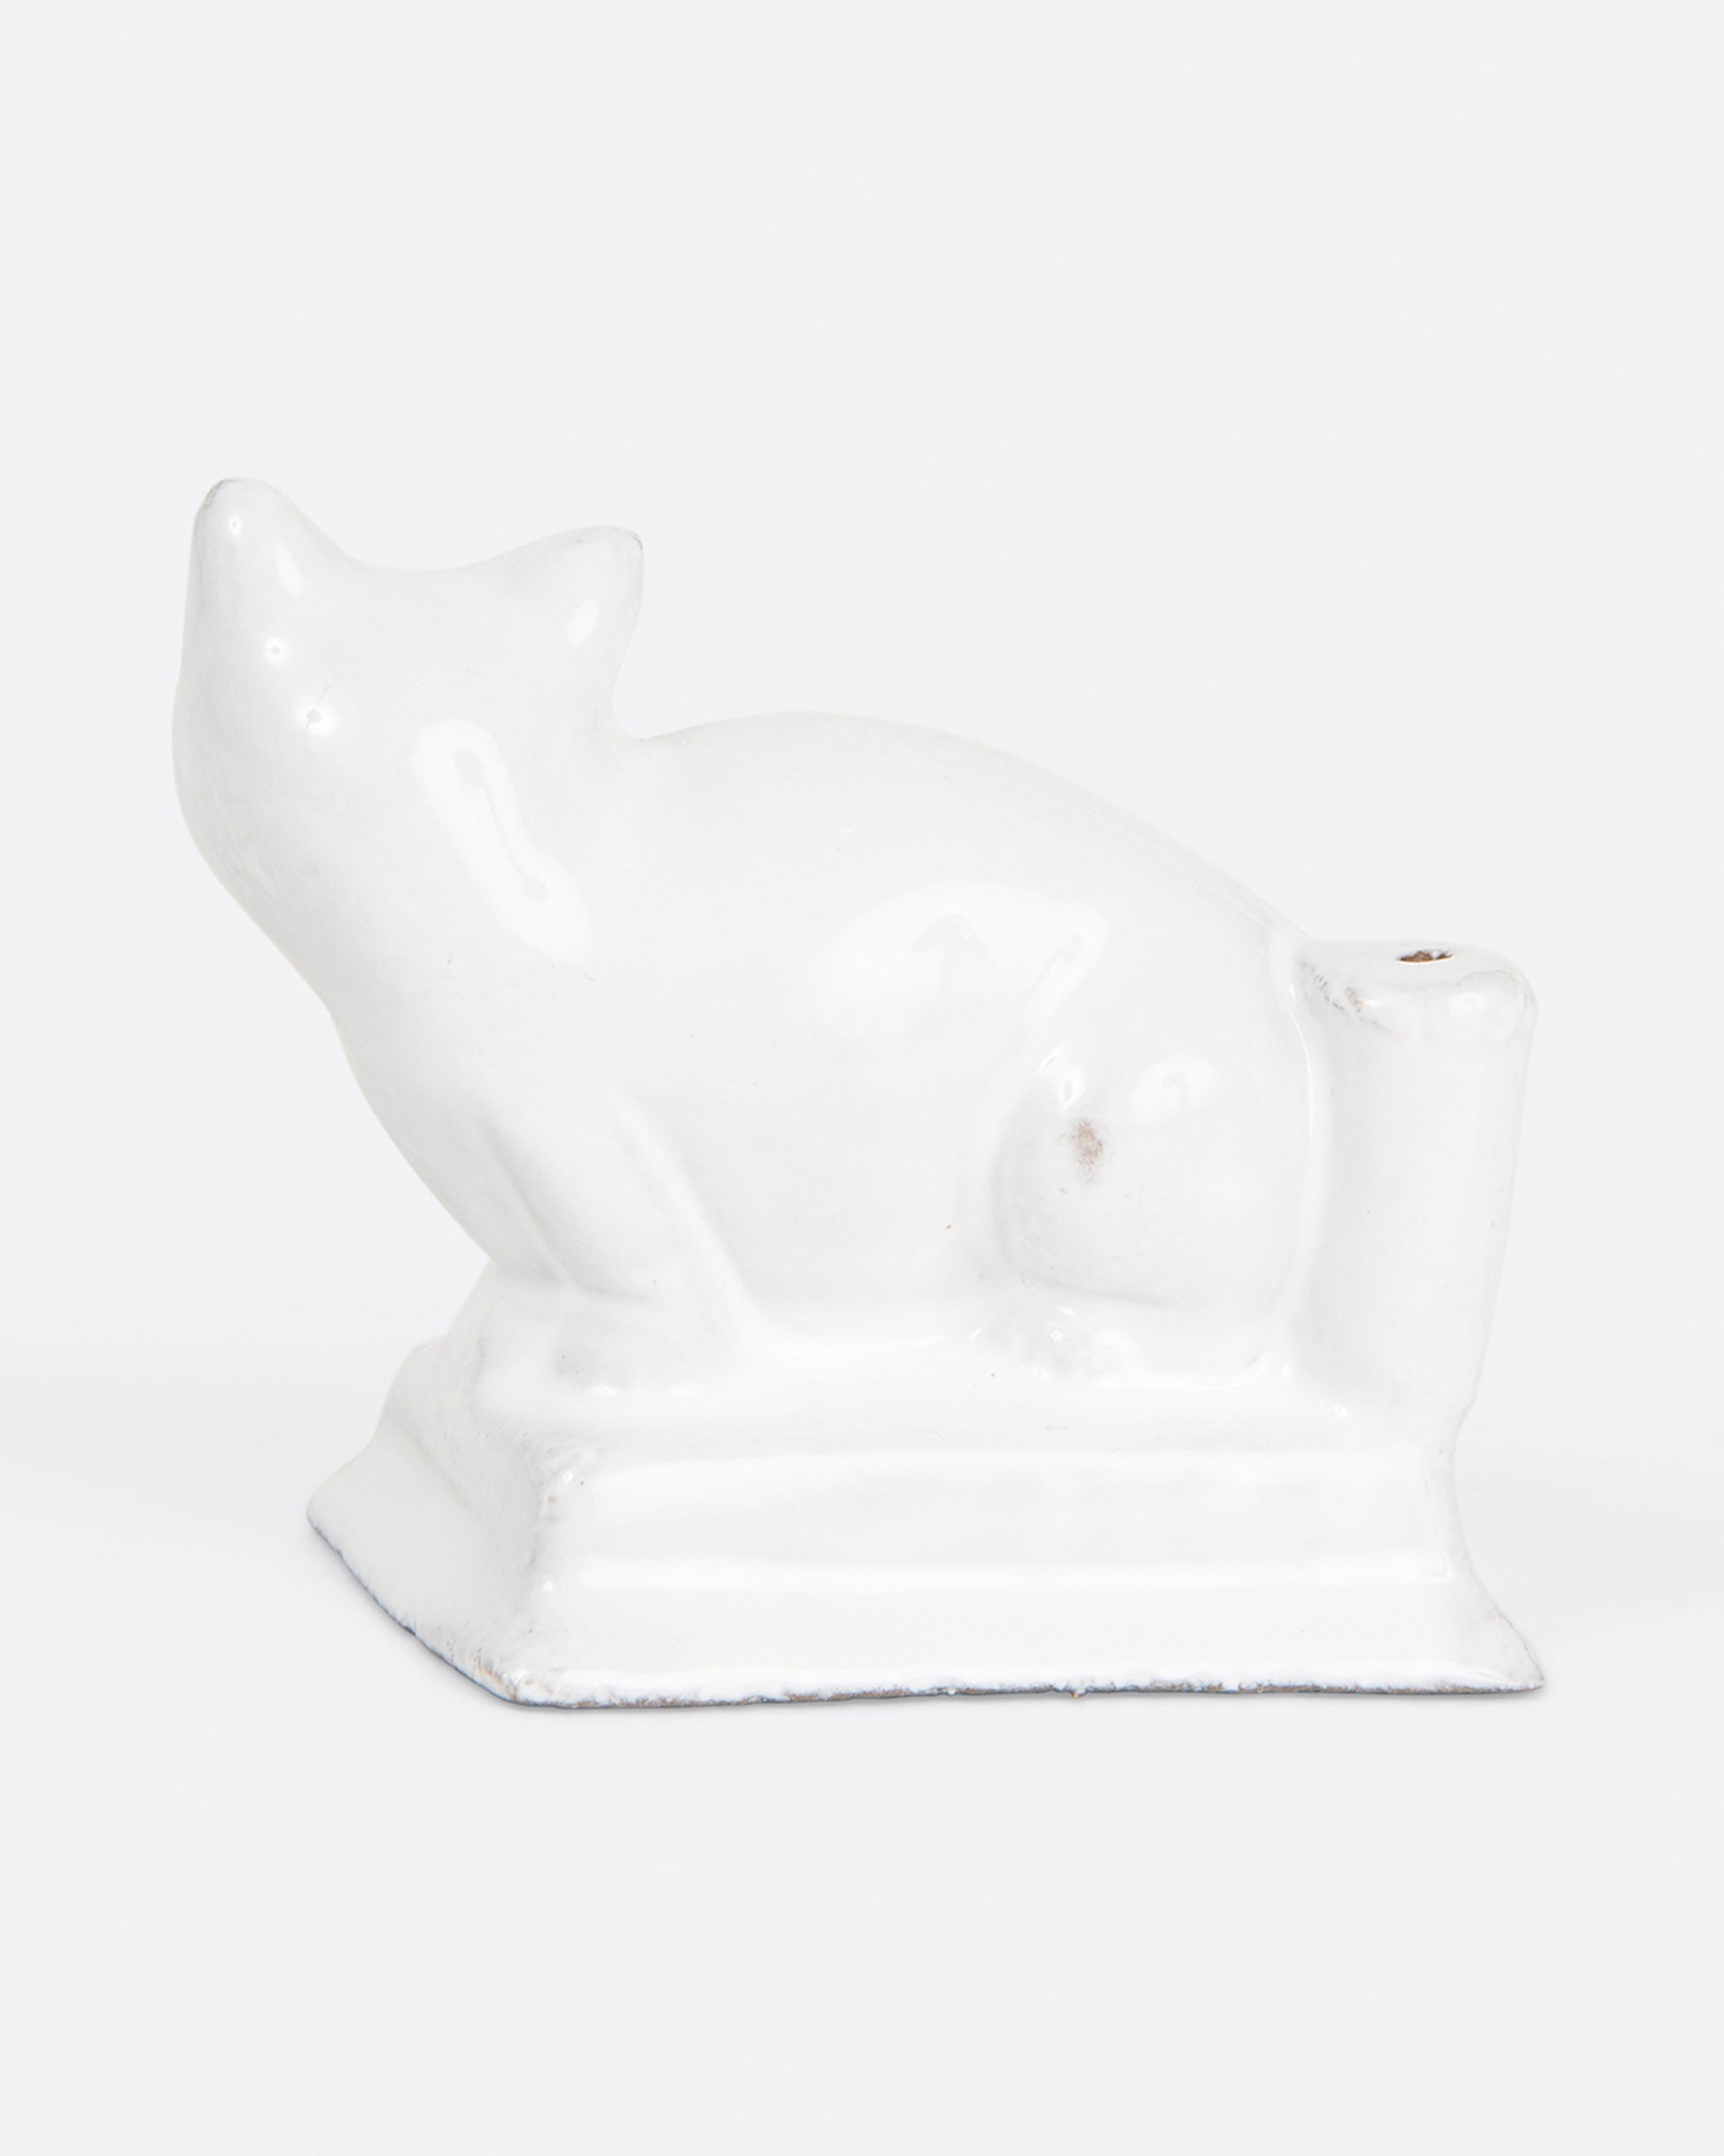 A glazed white ceramic cat-shaped incense holder, shown from the back.